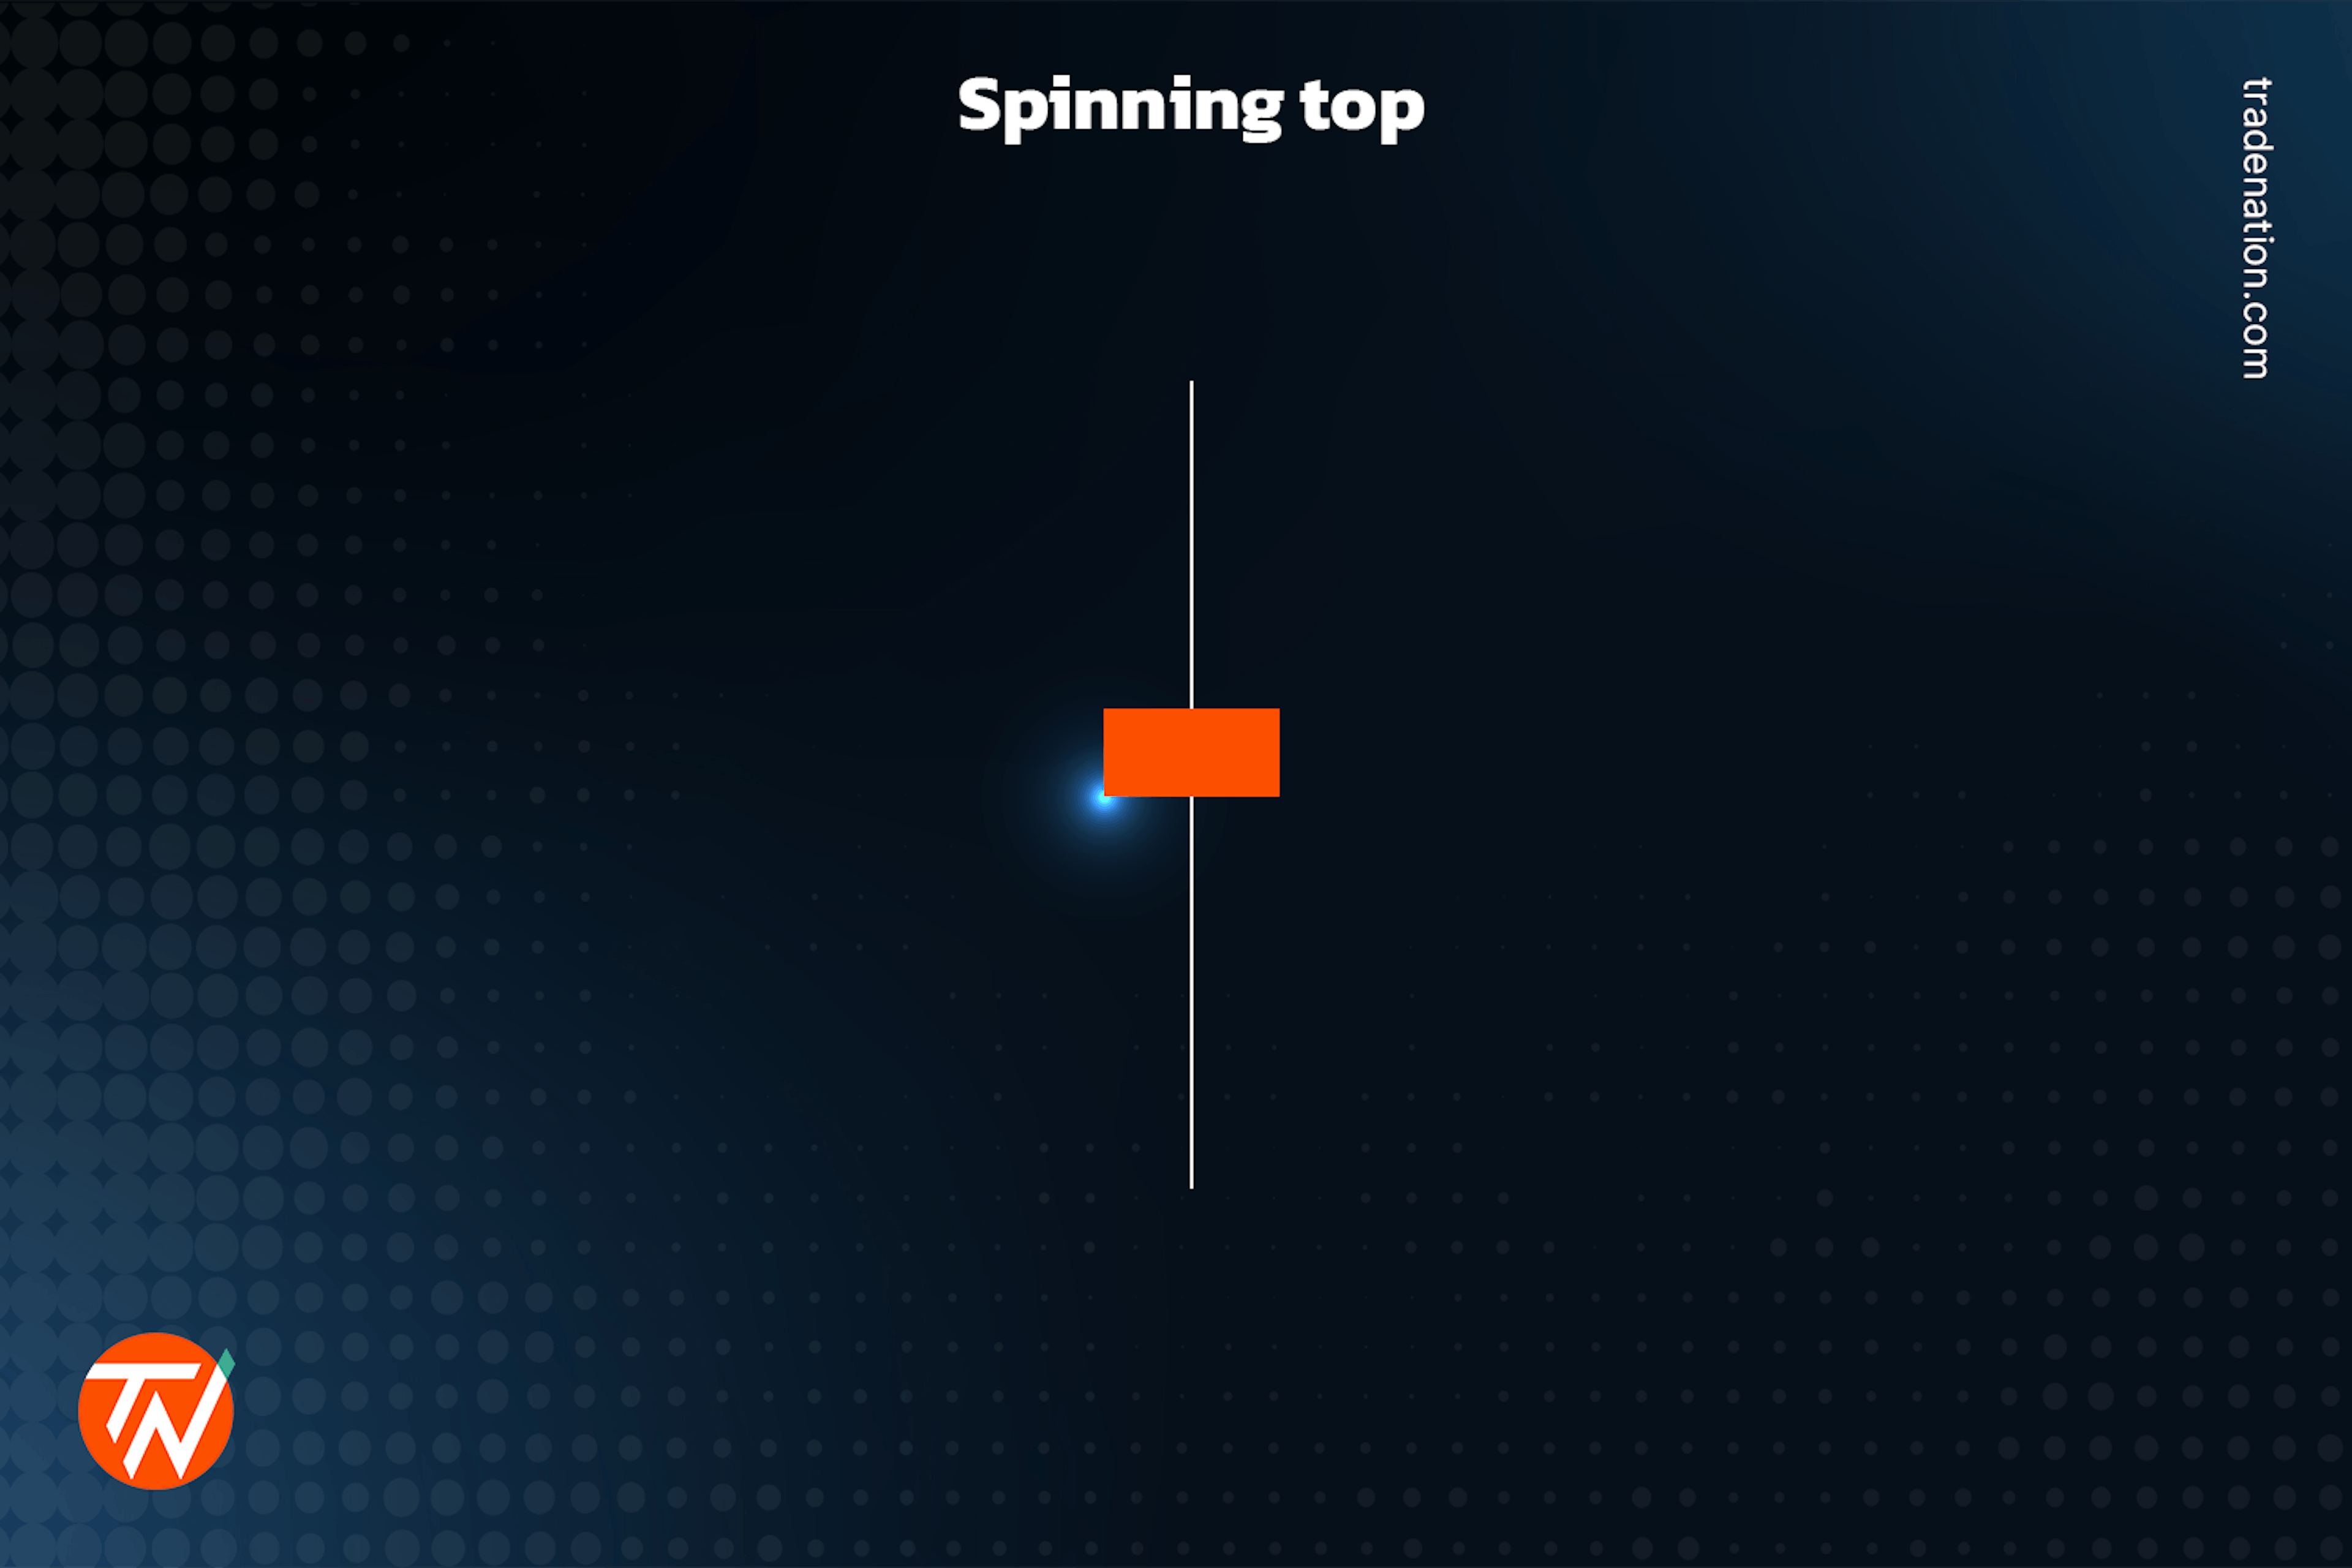 Spinning top candlestick